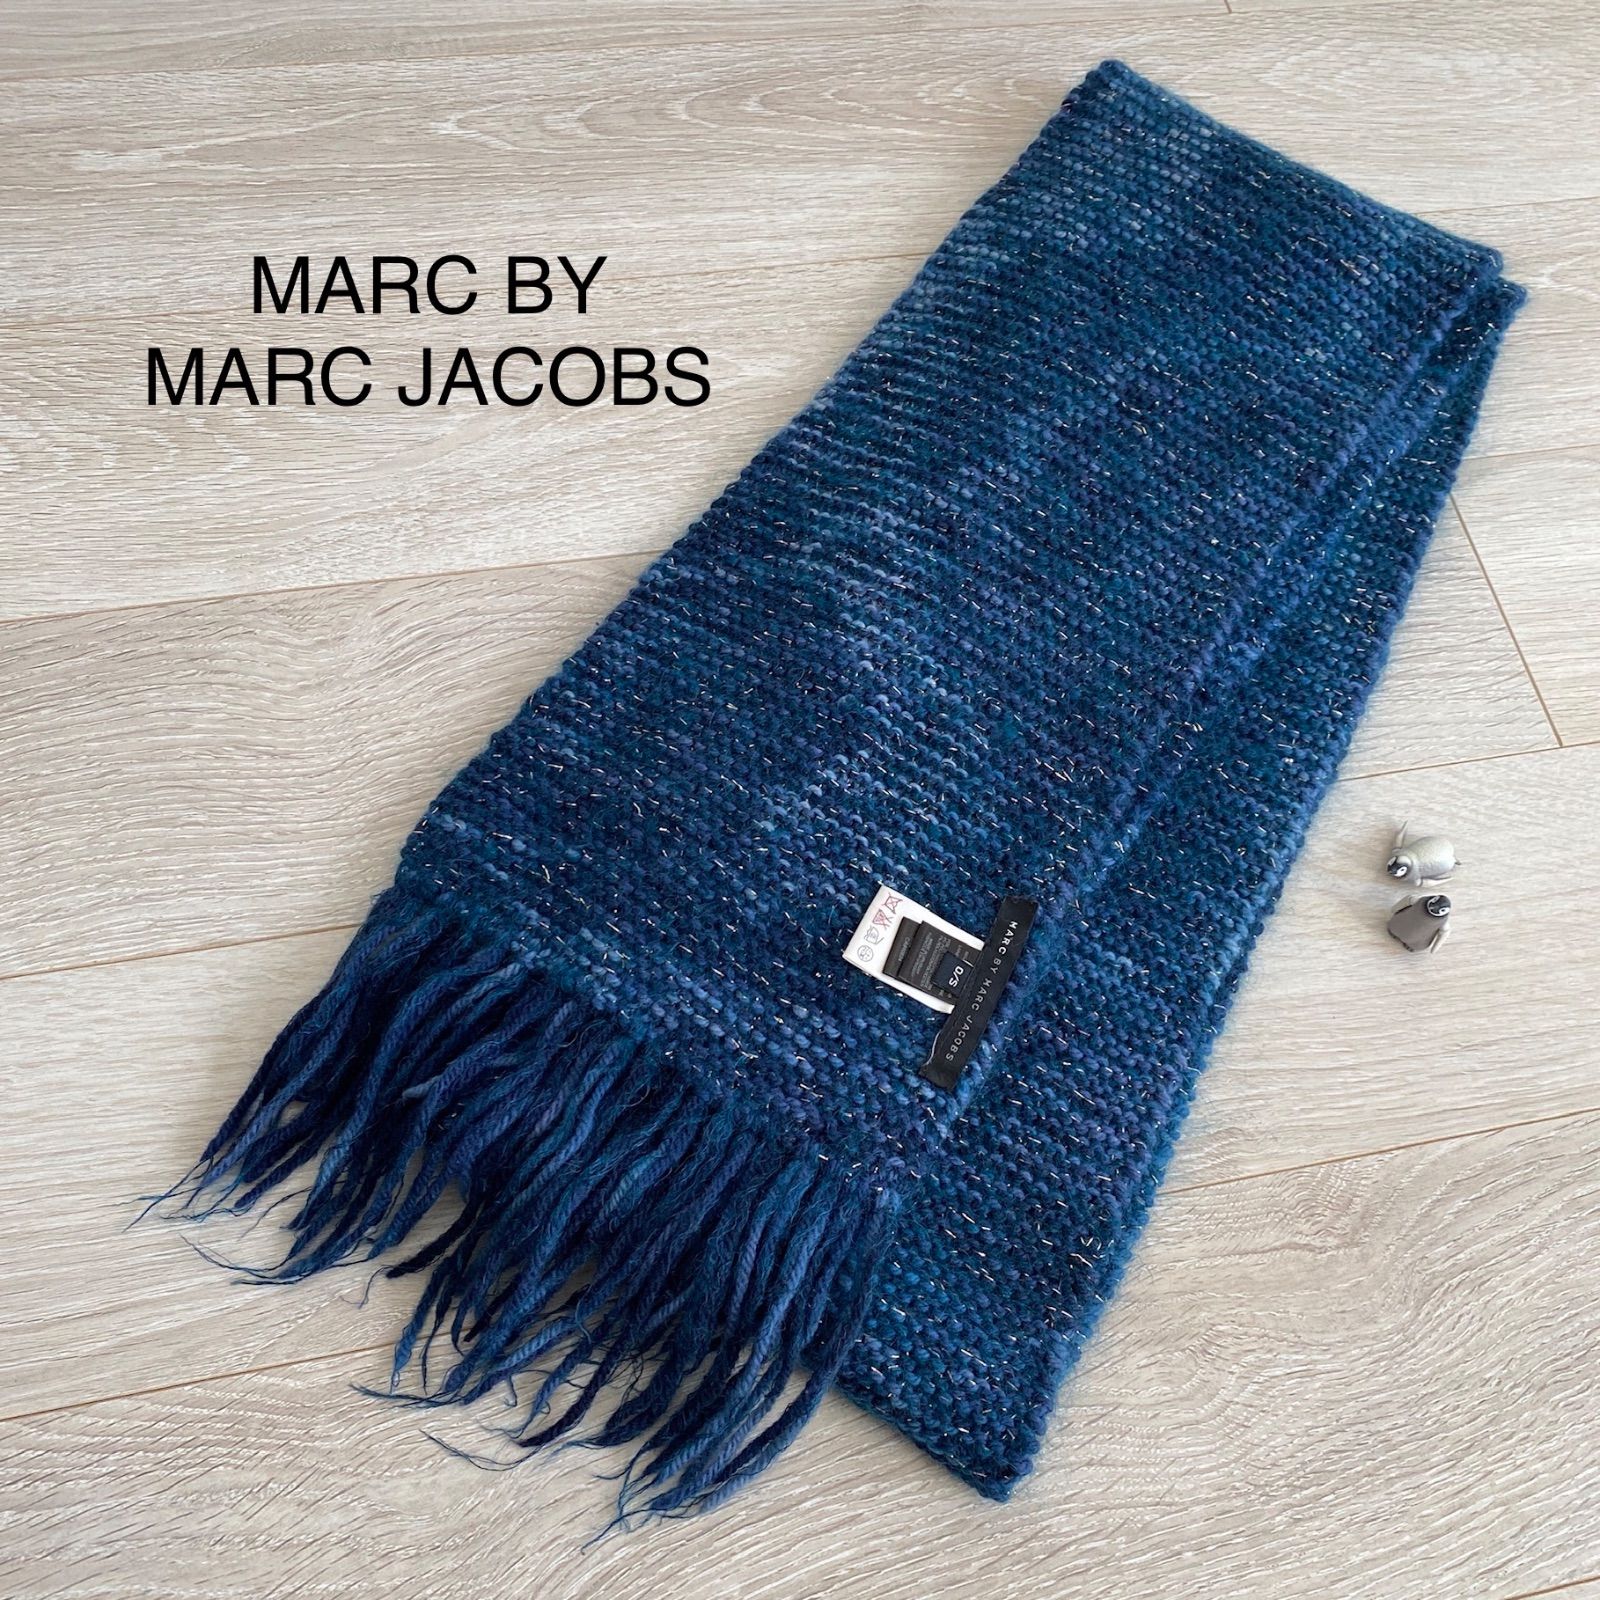 MARC BY MARC JACOBS マフラー